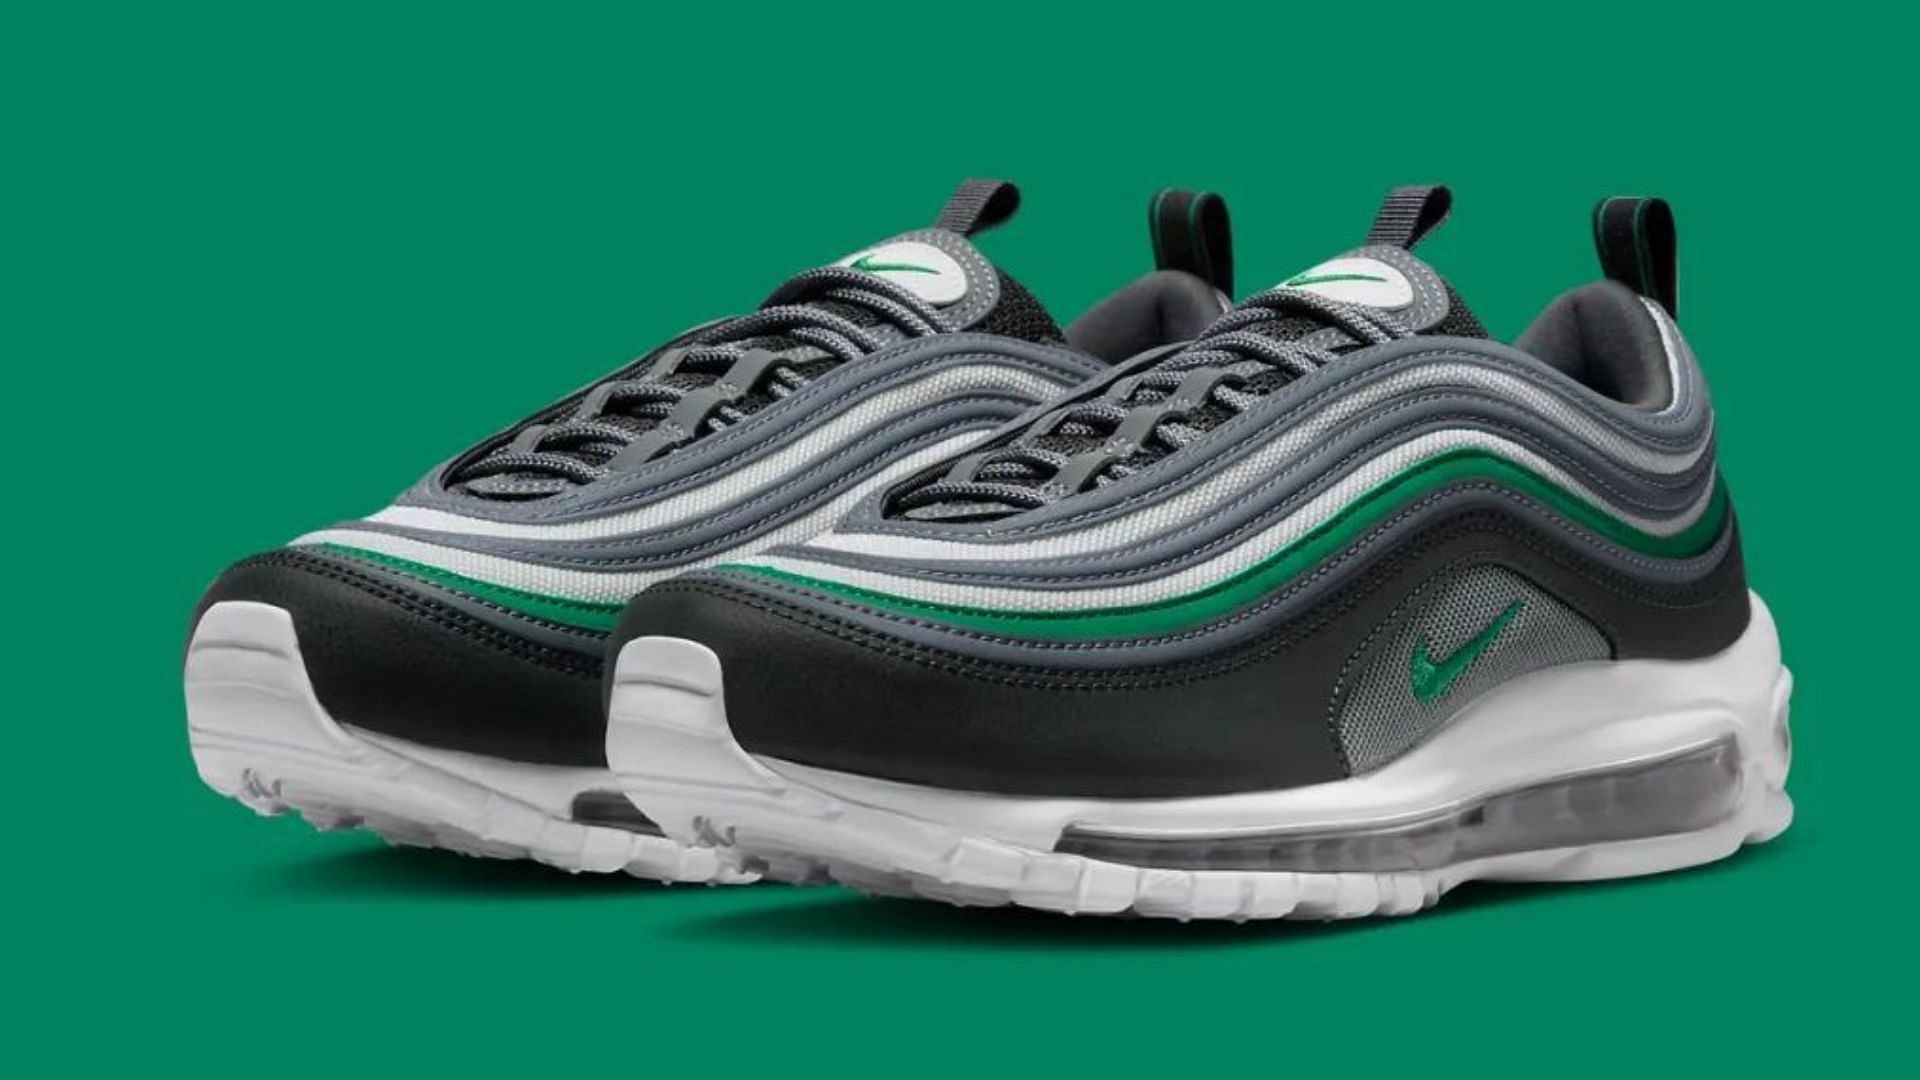 Nike Air Max 97 Cool Grey Stadium Green shoes (Image via House of Heat) 